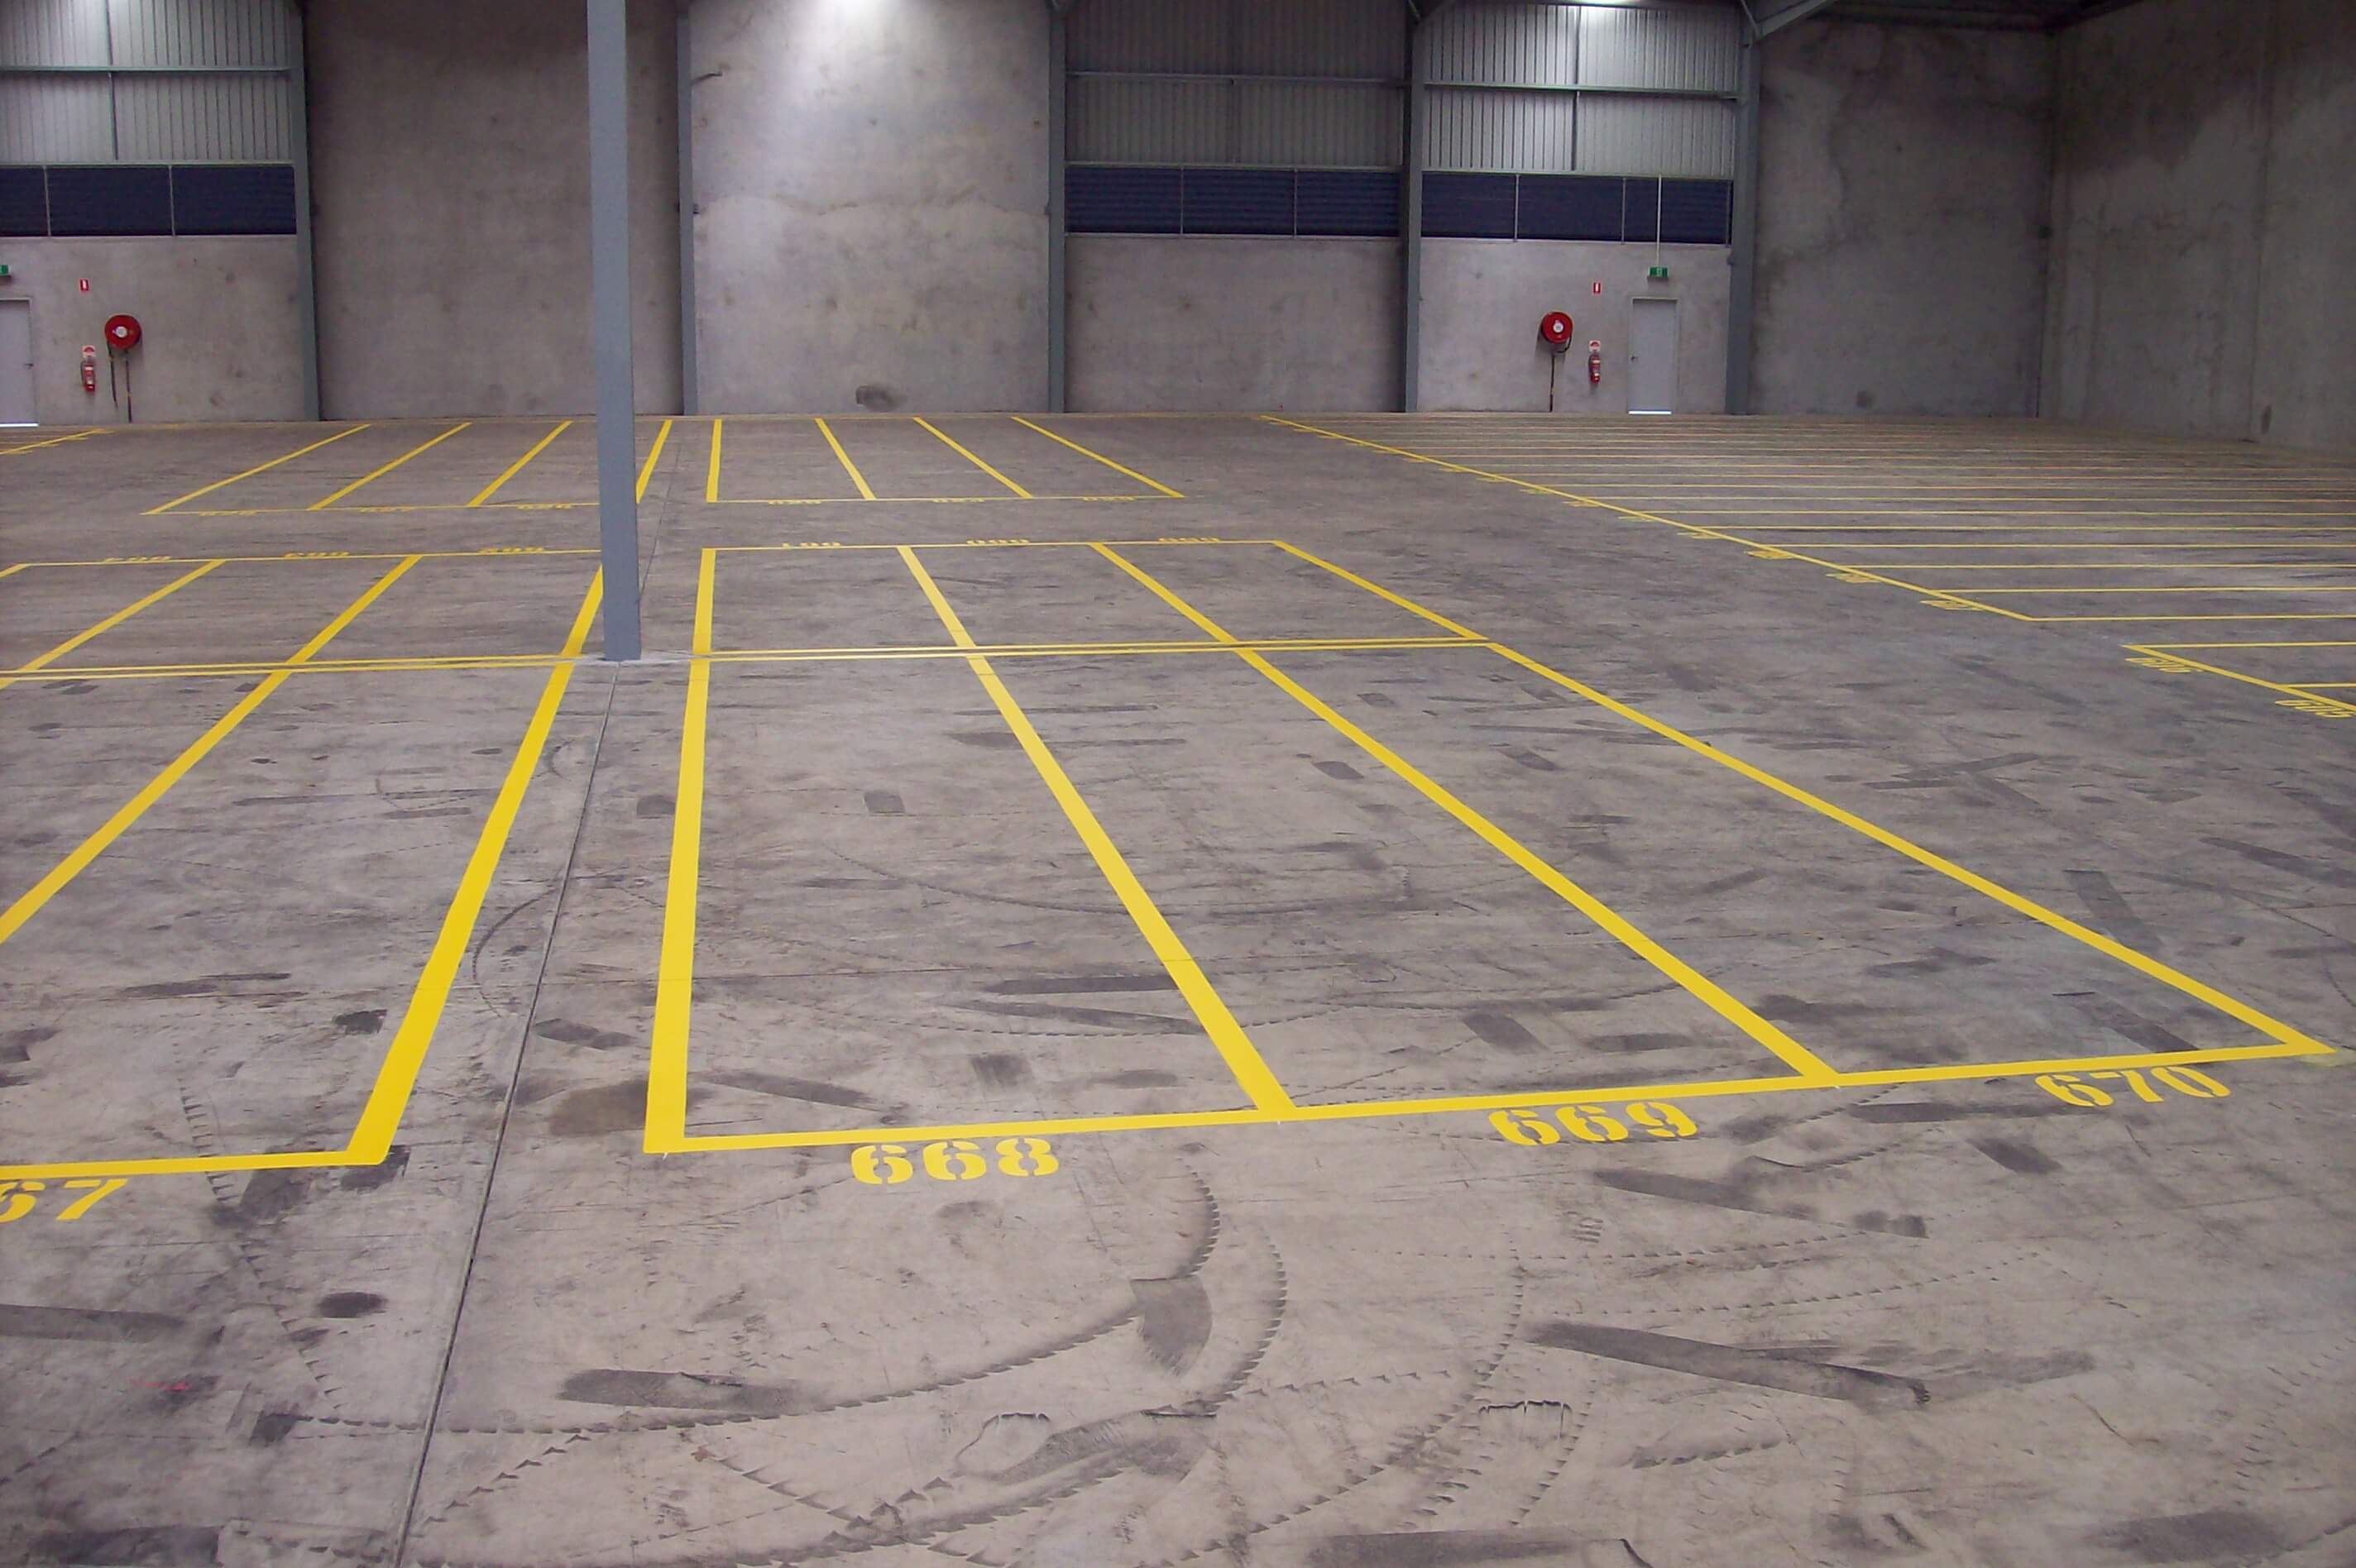 Distribution Warehouse With The Line Marking Showing Pallet Lines And Numbering Ready To Go (1)